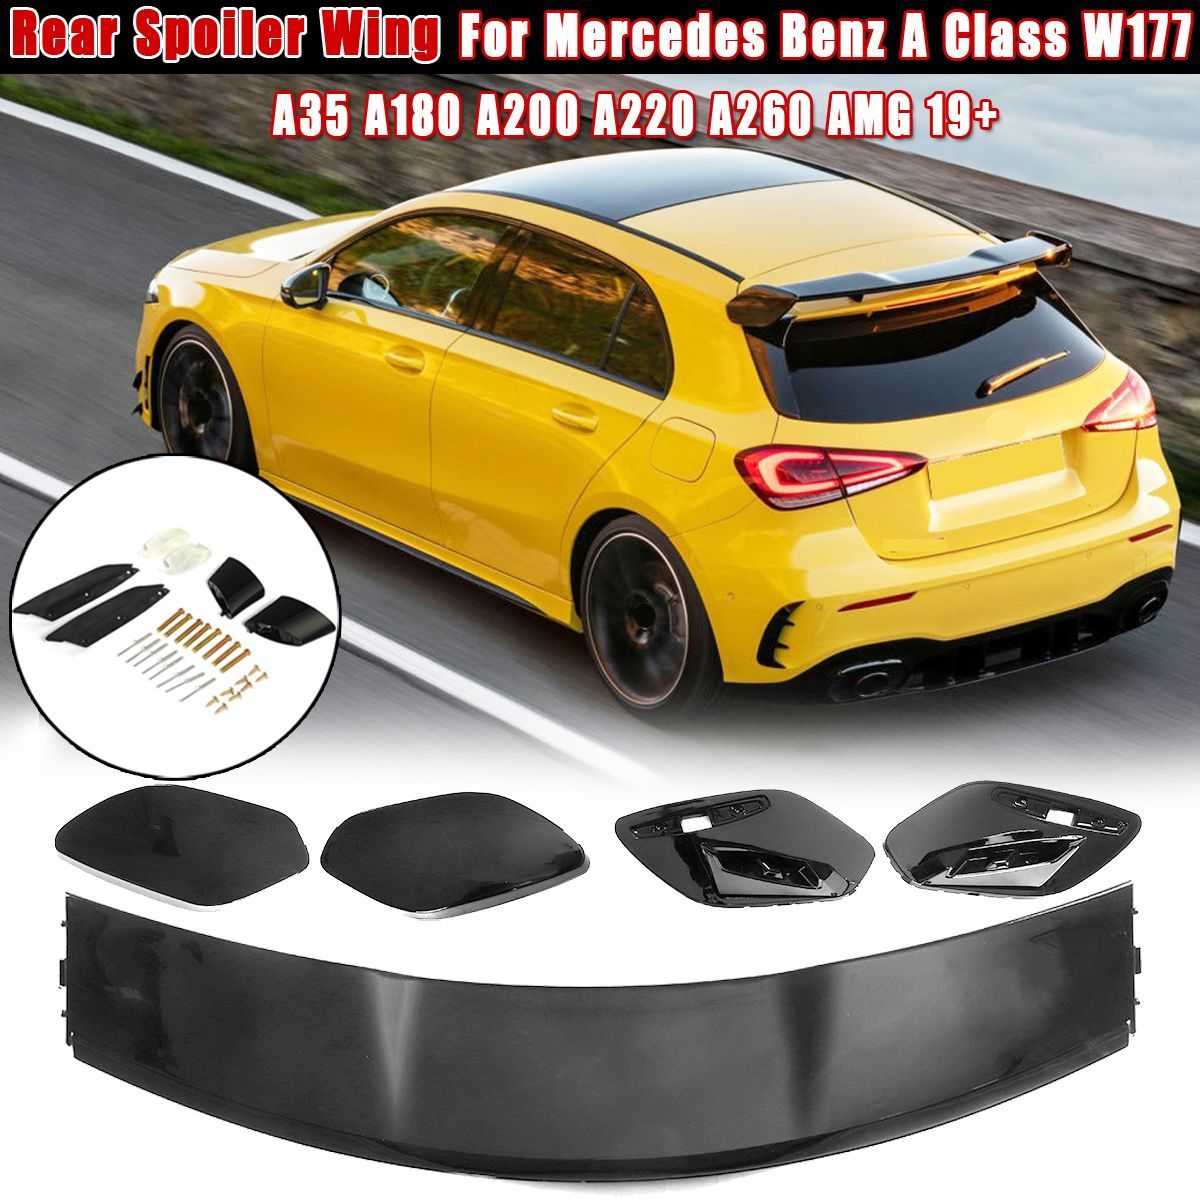 Car-Rear-Trunk-Glossy-Painted-Air-Splitter-Spoiler-Wing-For-Mercedes-Benz-A-Class-W177-A35-A180-A200-1615214